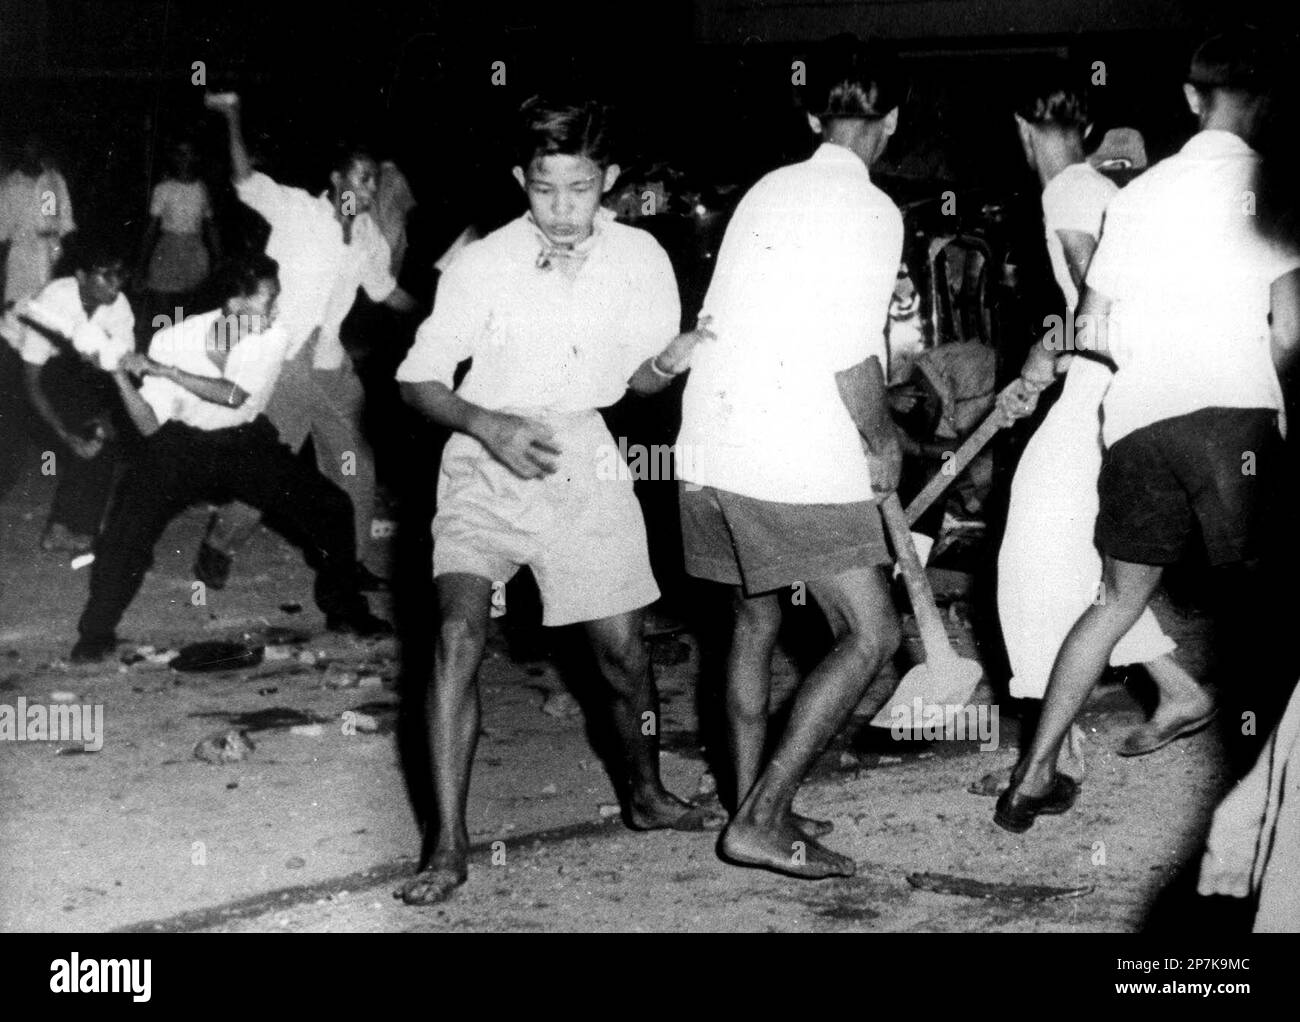 The Hock Lee Bus Riots occurred in May and June 1955 between the police ...